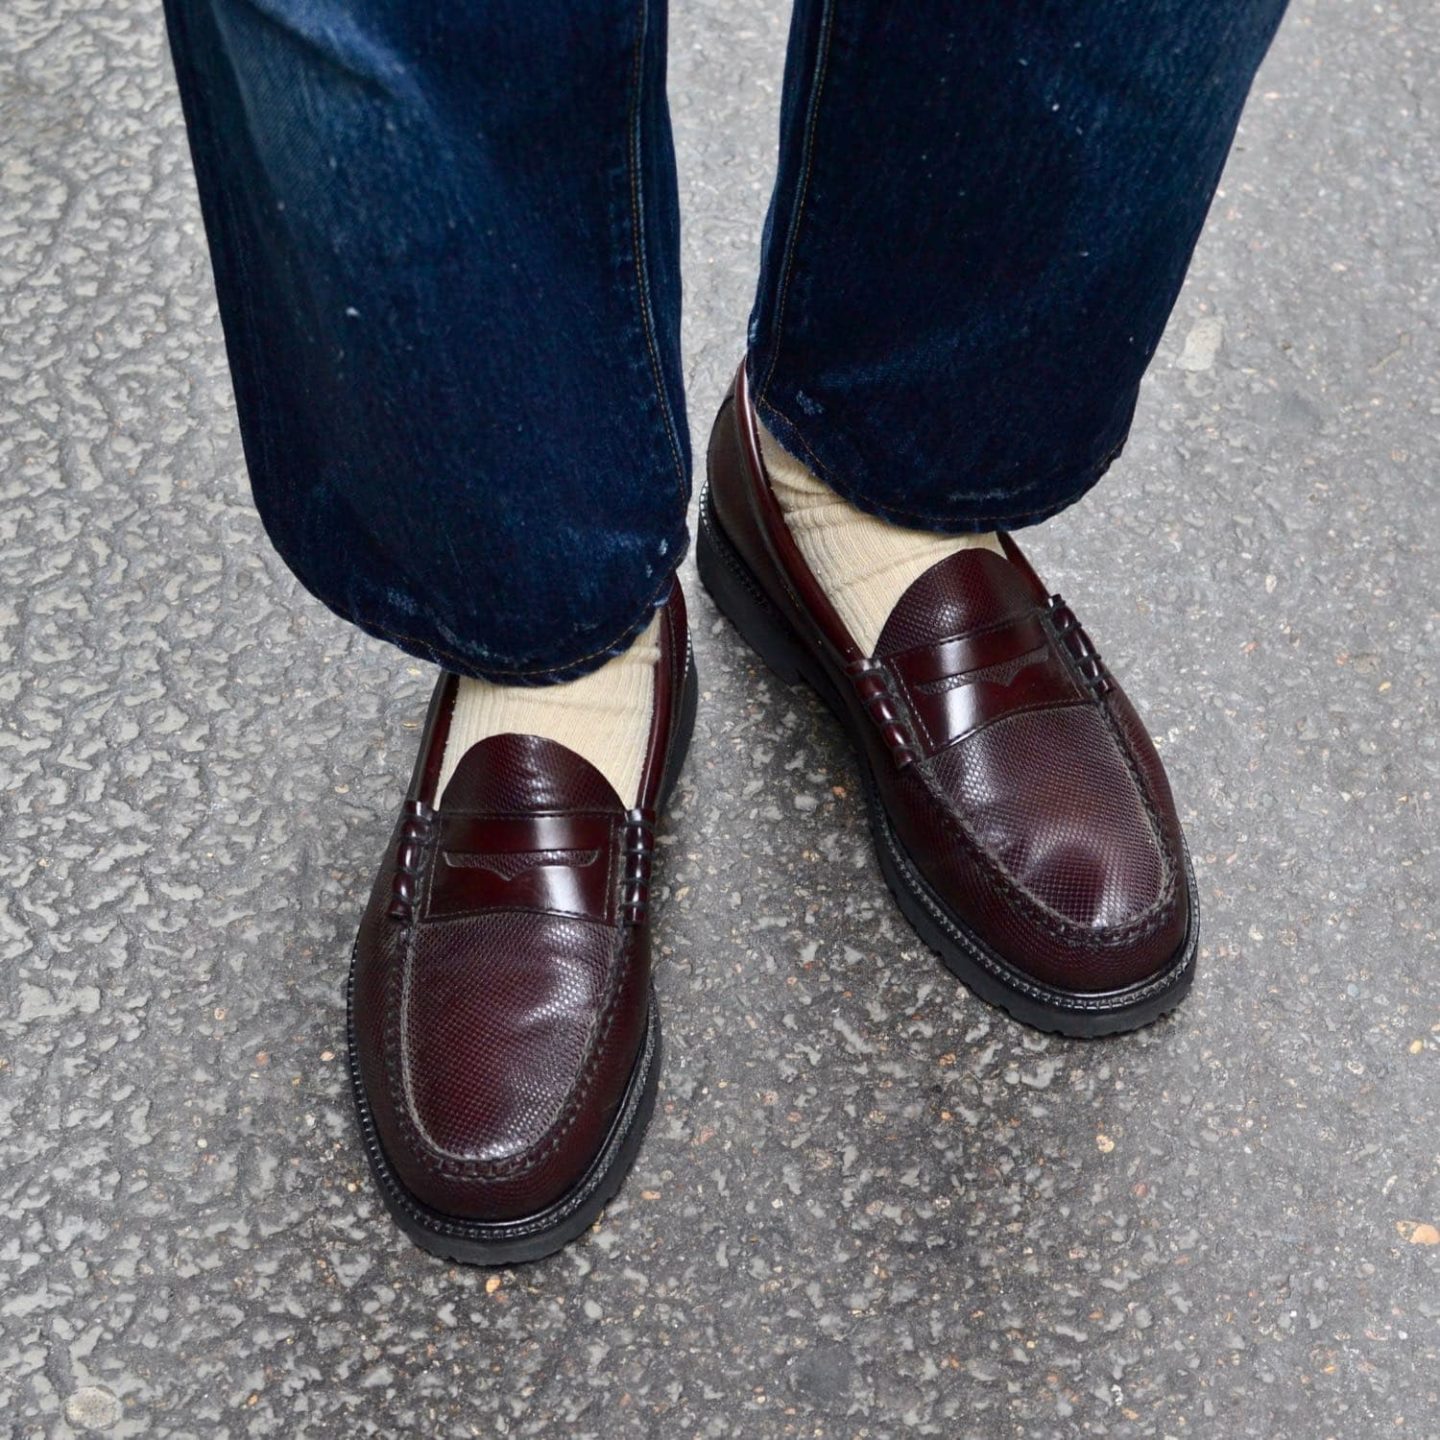 mocassins penny loafers gh bass x fred perry